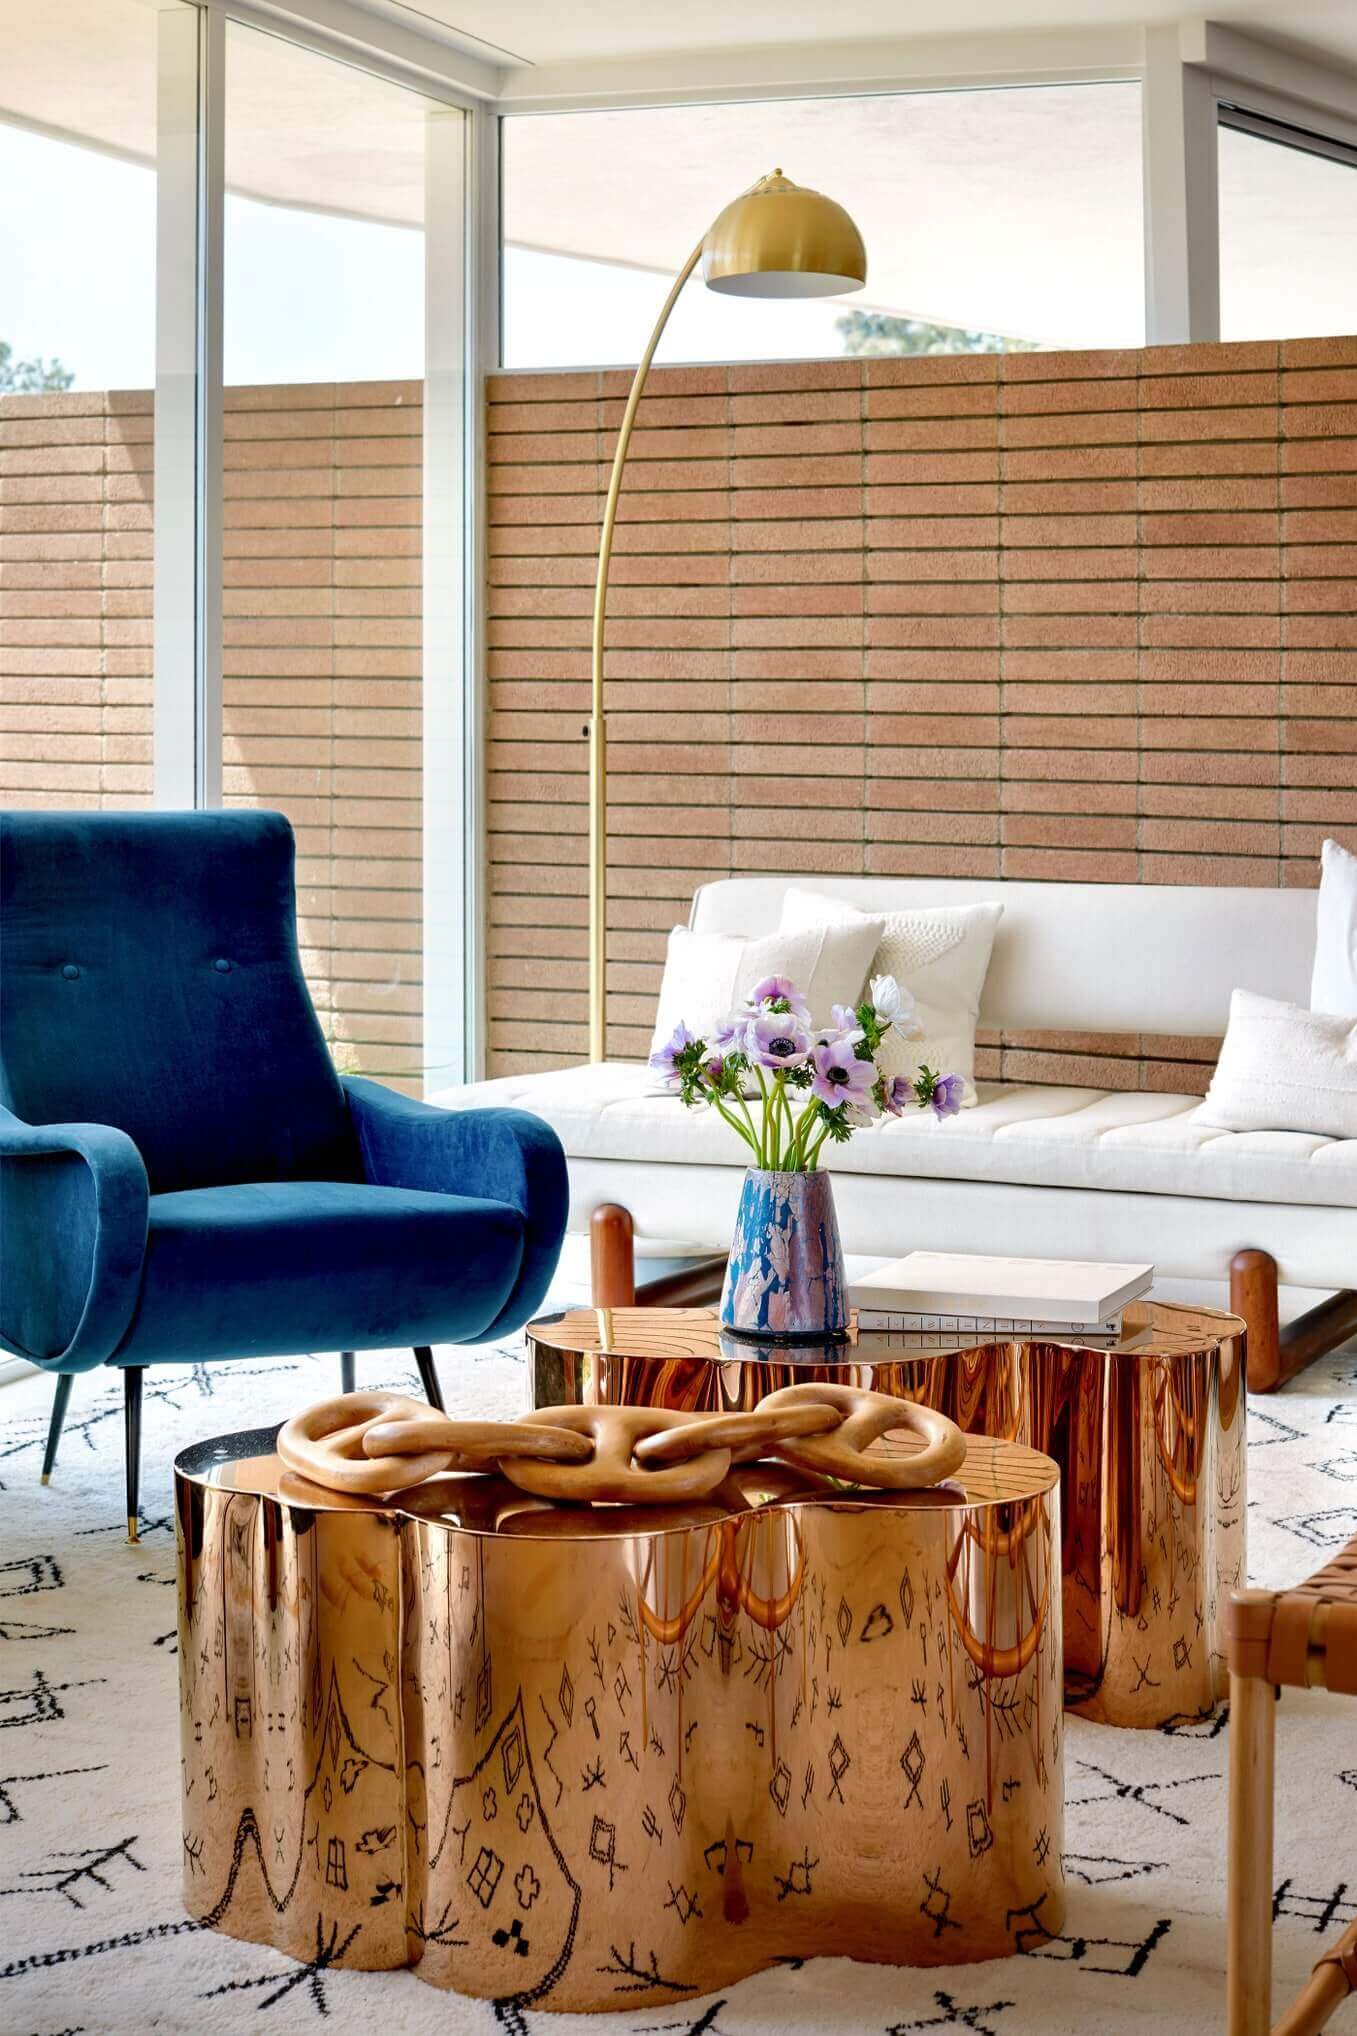 Living room featuring a blue armchair and a bold golden center table